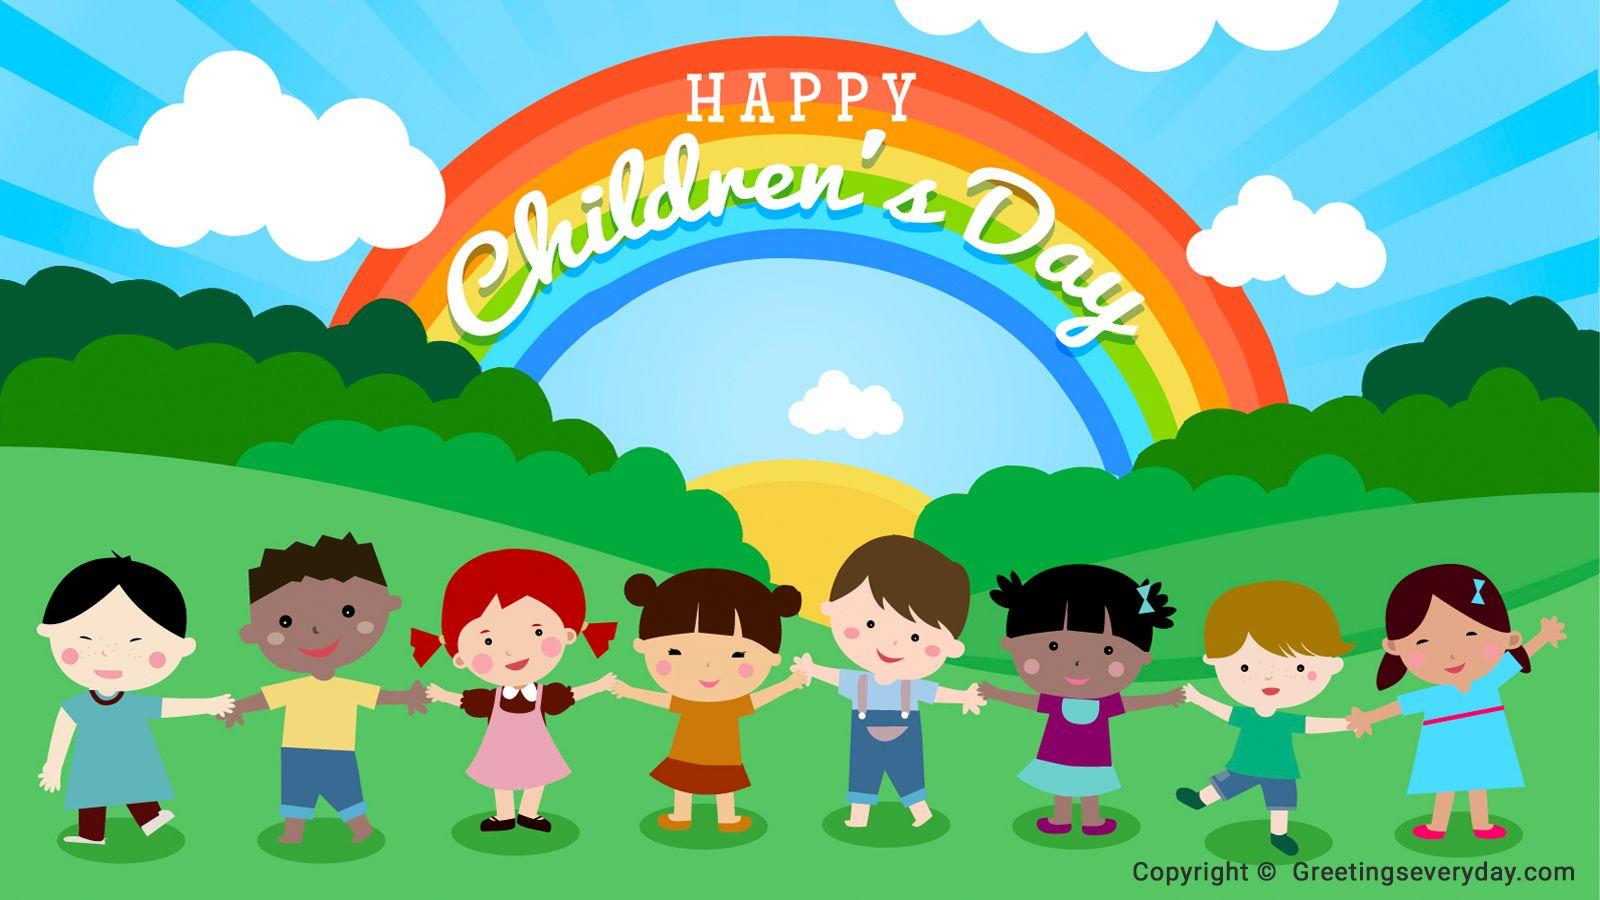 Best}* Happy Children's Day 2017 HD Wallpaper, Image, Picture & Photo